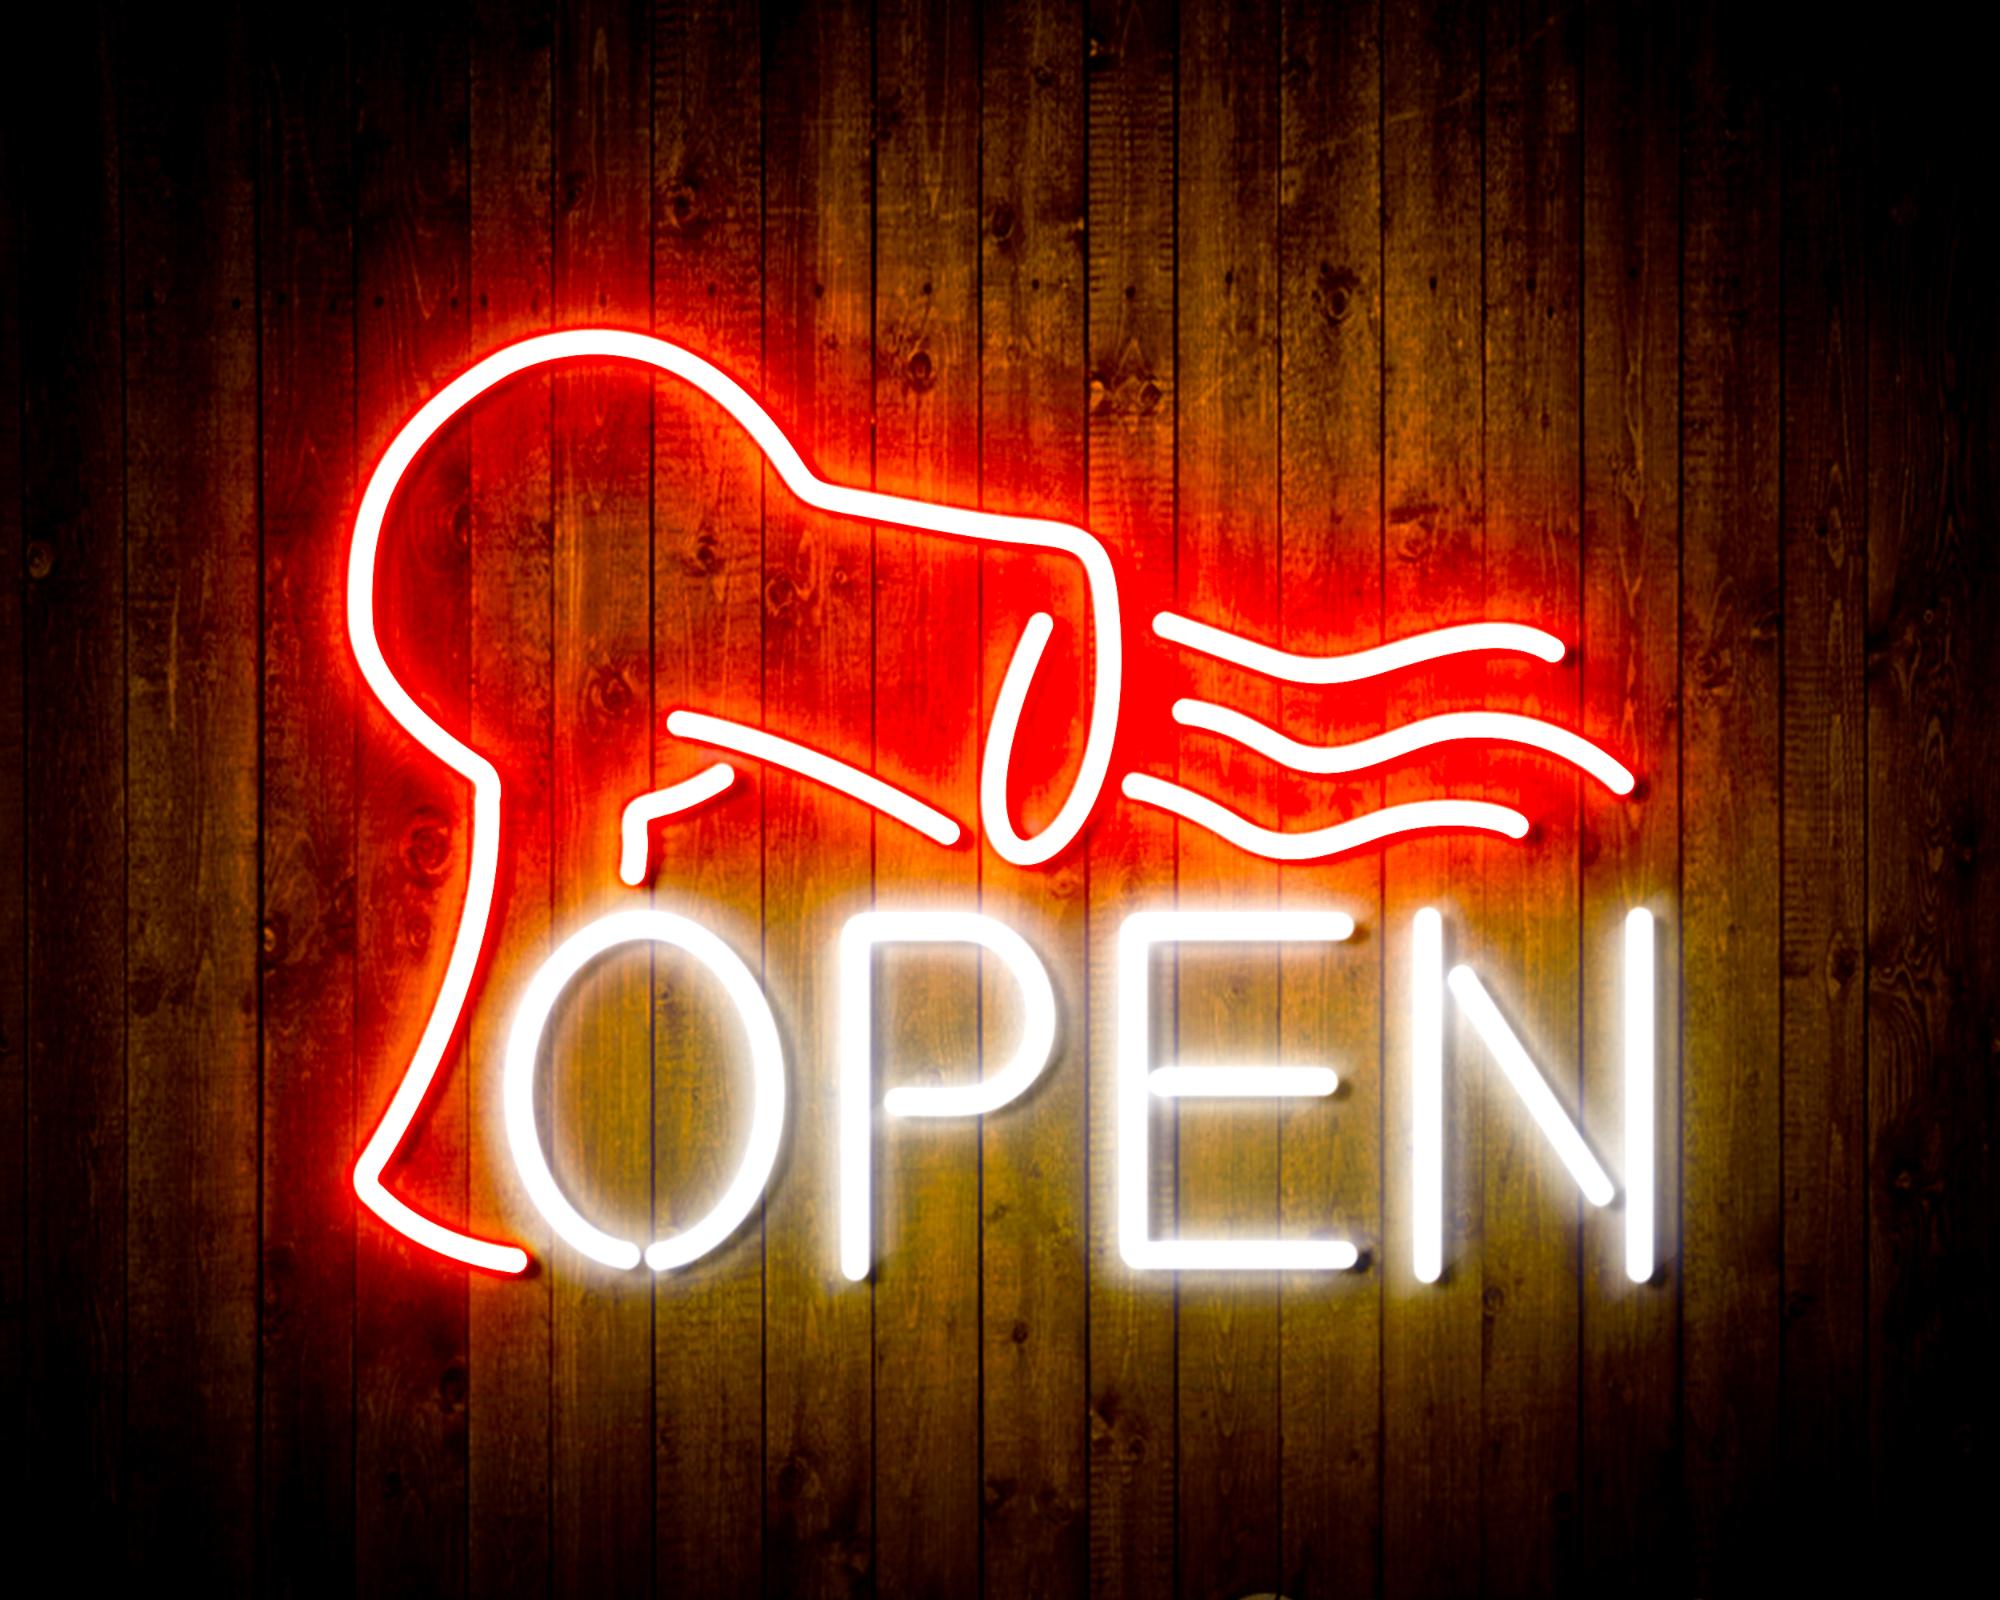 Barber OPEN with Hair Dryer LED Neon Sign Wall Light